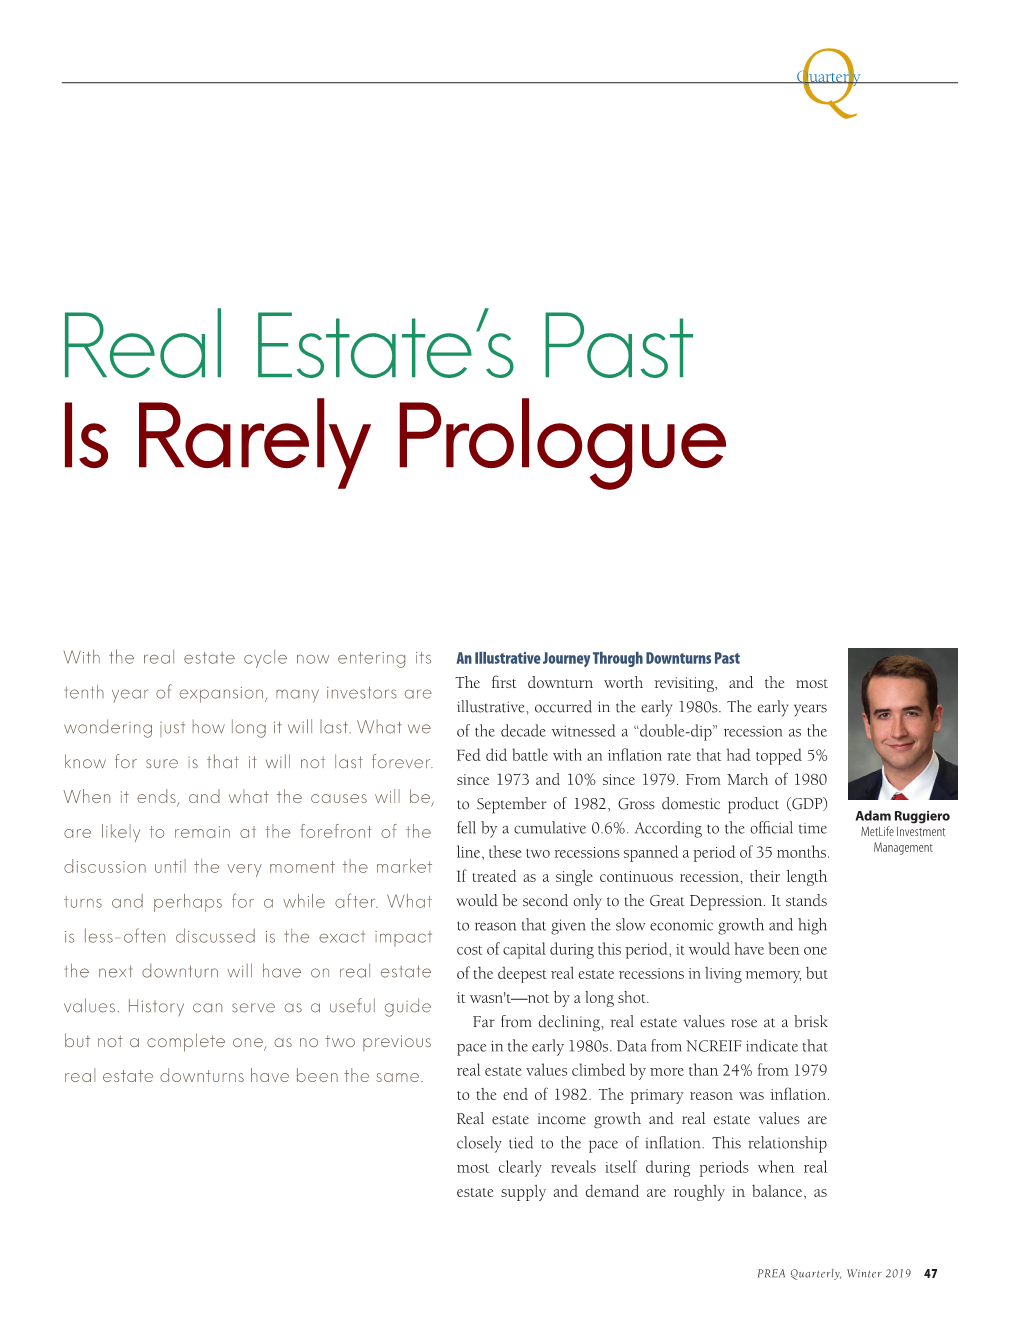 Real Estate's Past Is Rarely Prologue